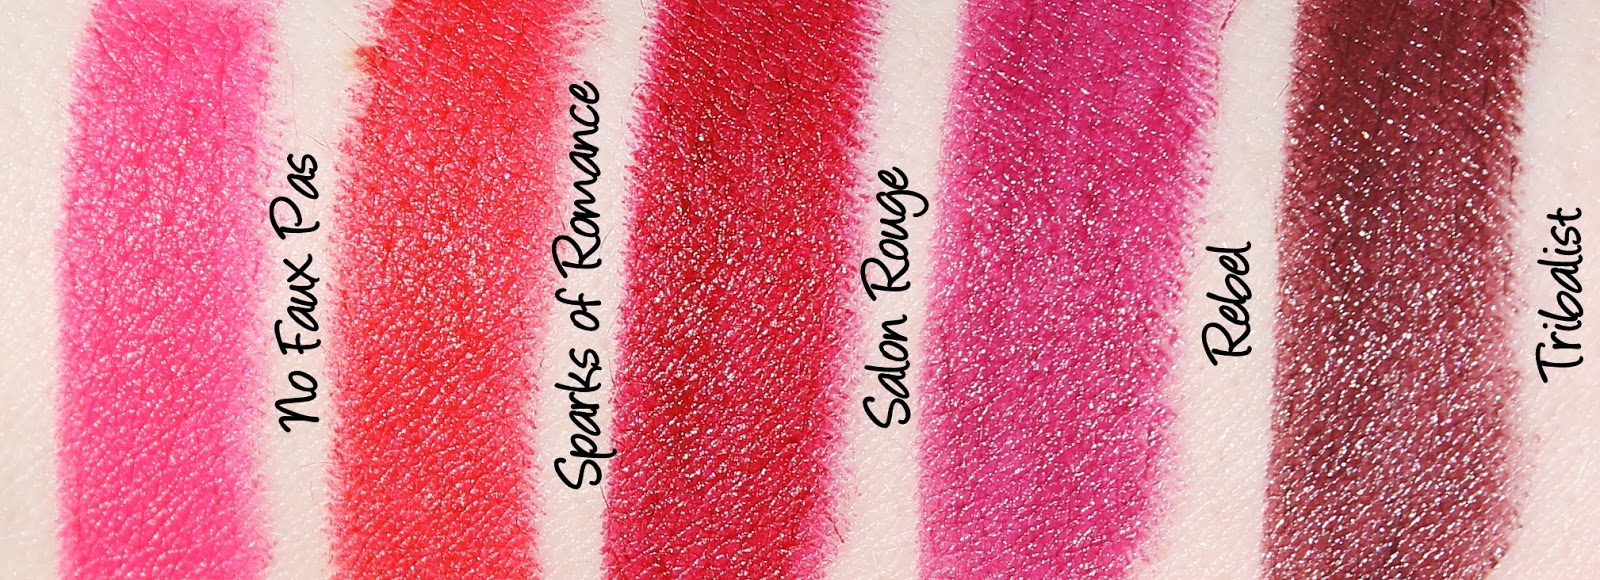 MAC Heirloom Mix Lipsticks - No Faux Pas, Sparks of Romance, Salon Rouge, Rebel and Tribalist Swatches & Review